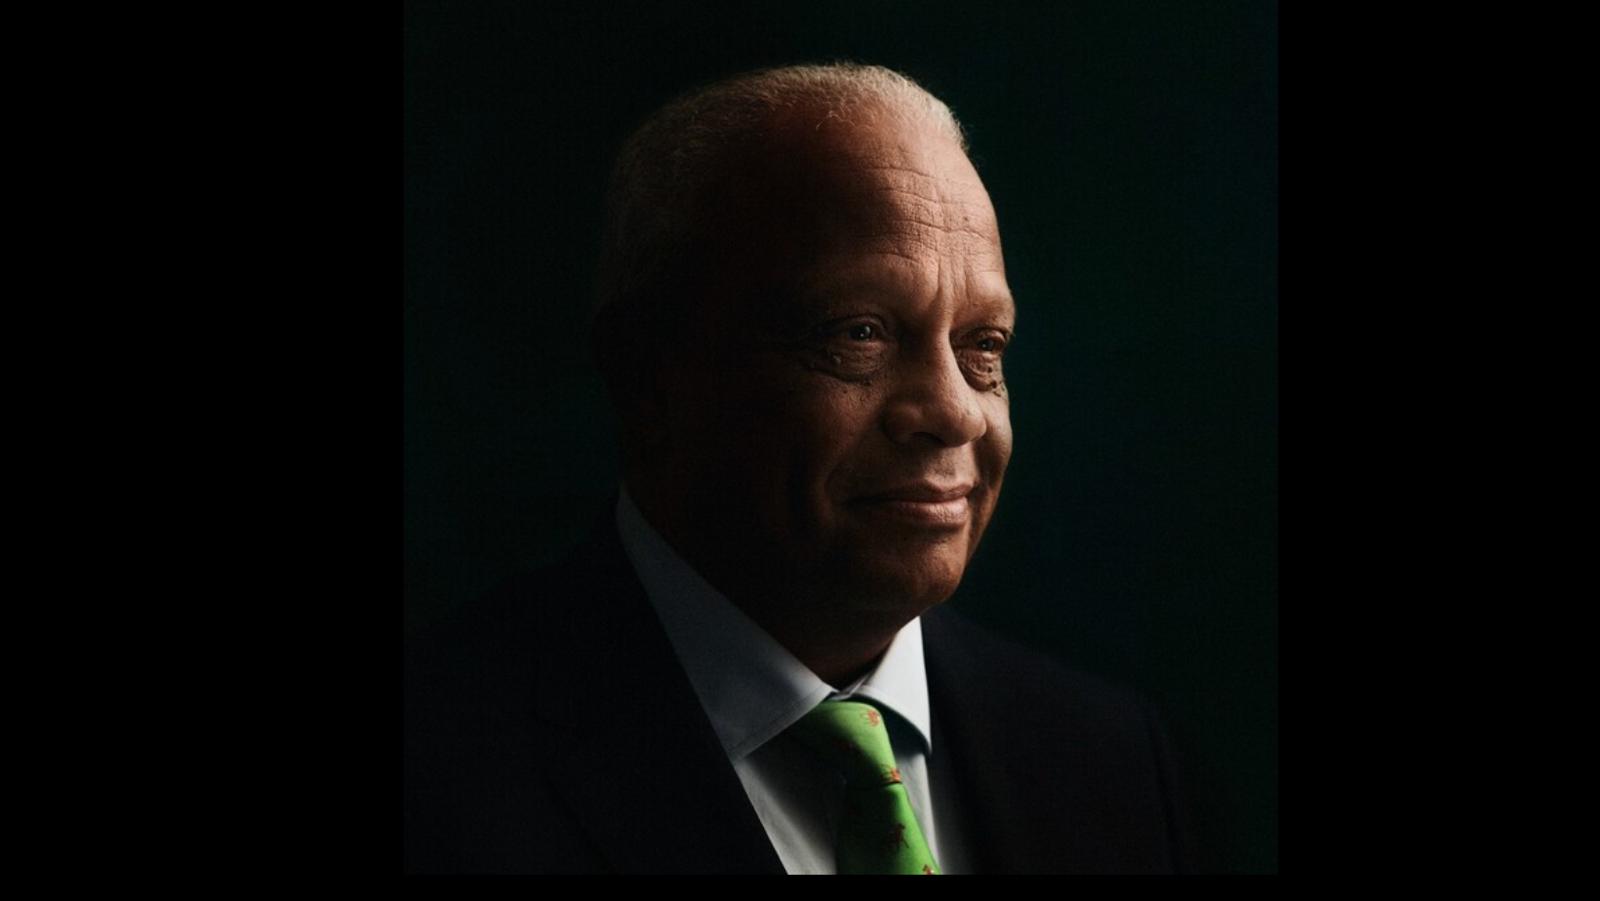 Lord Hastings: a Life committed to Leadership